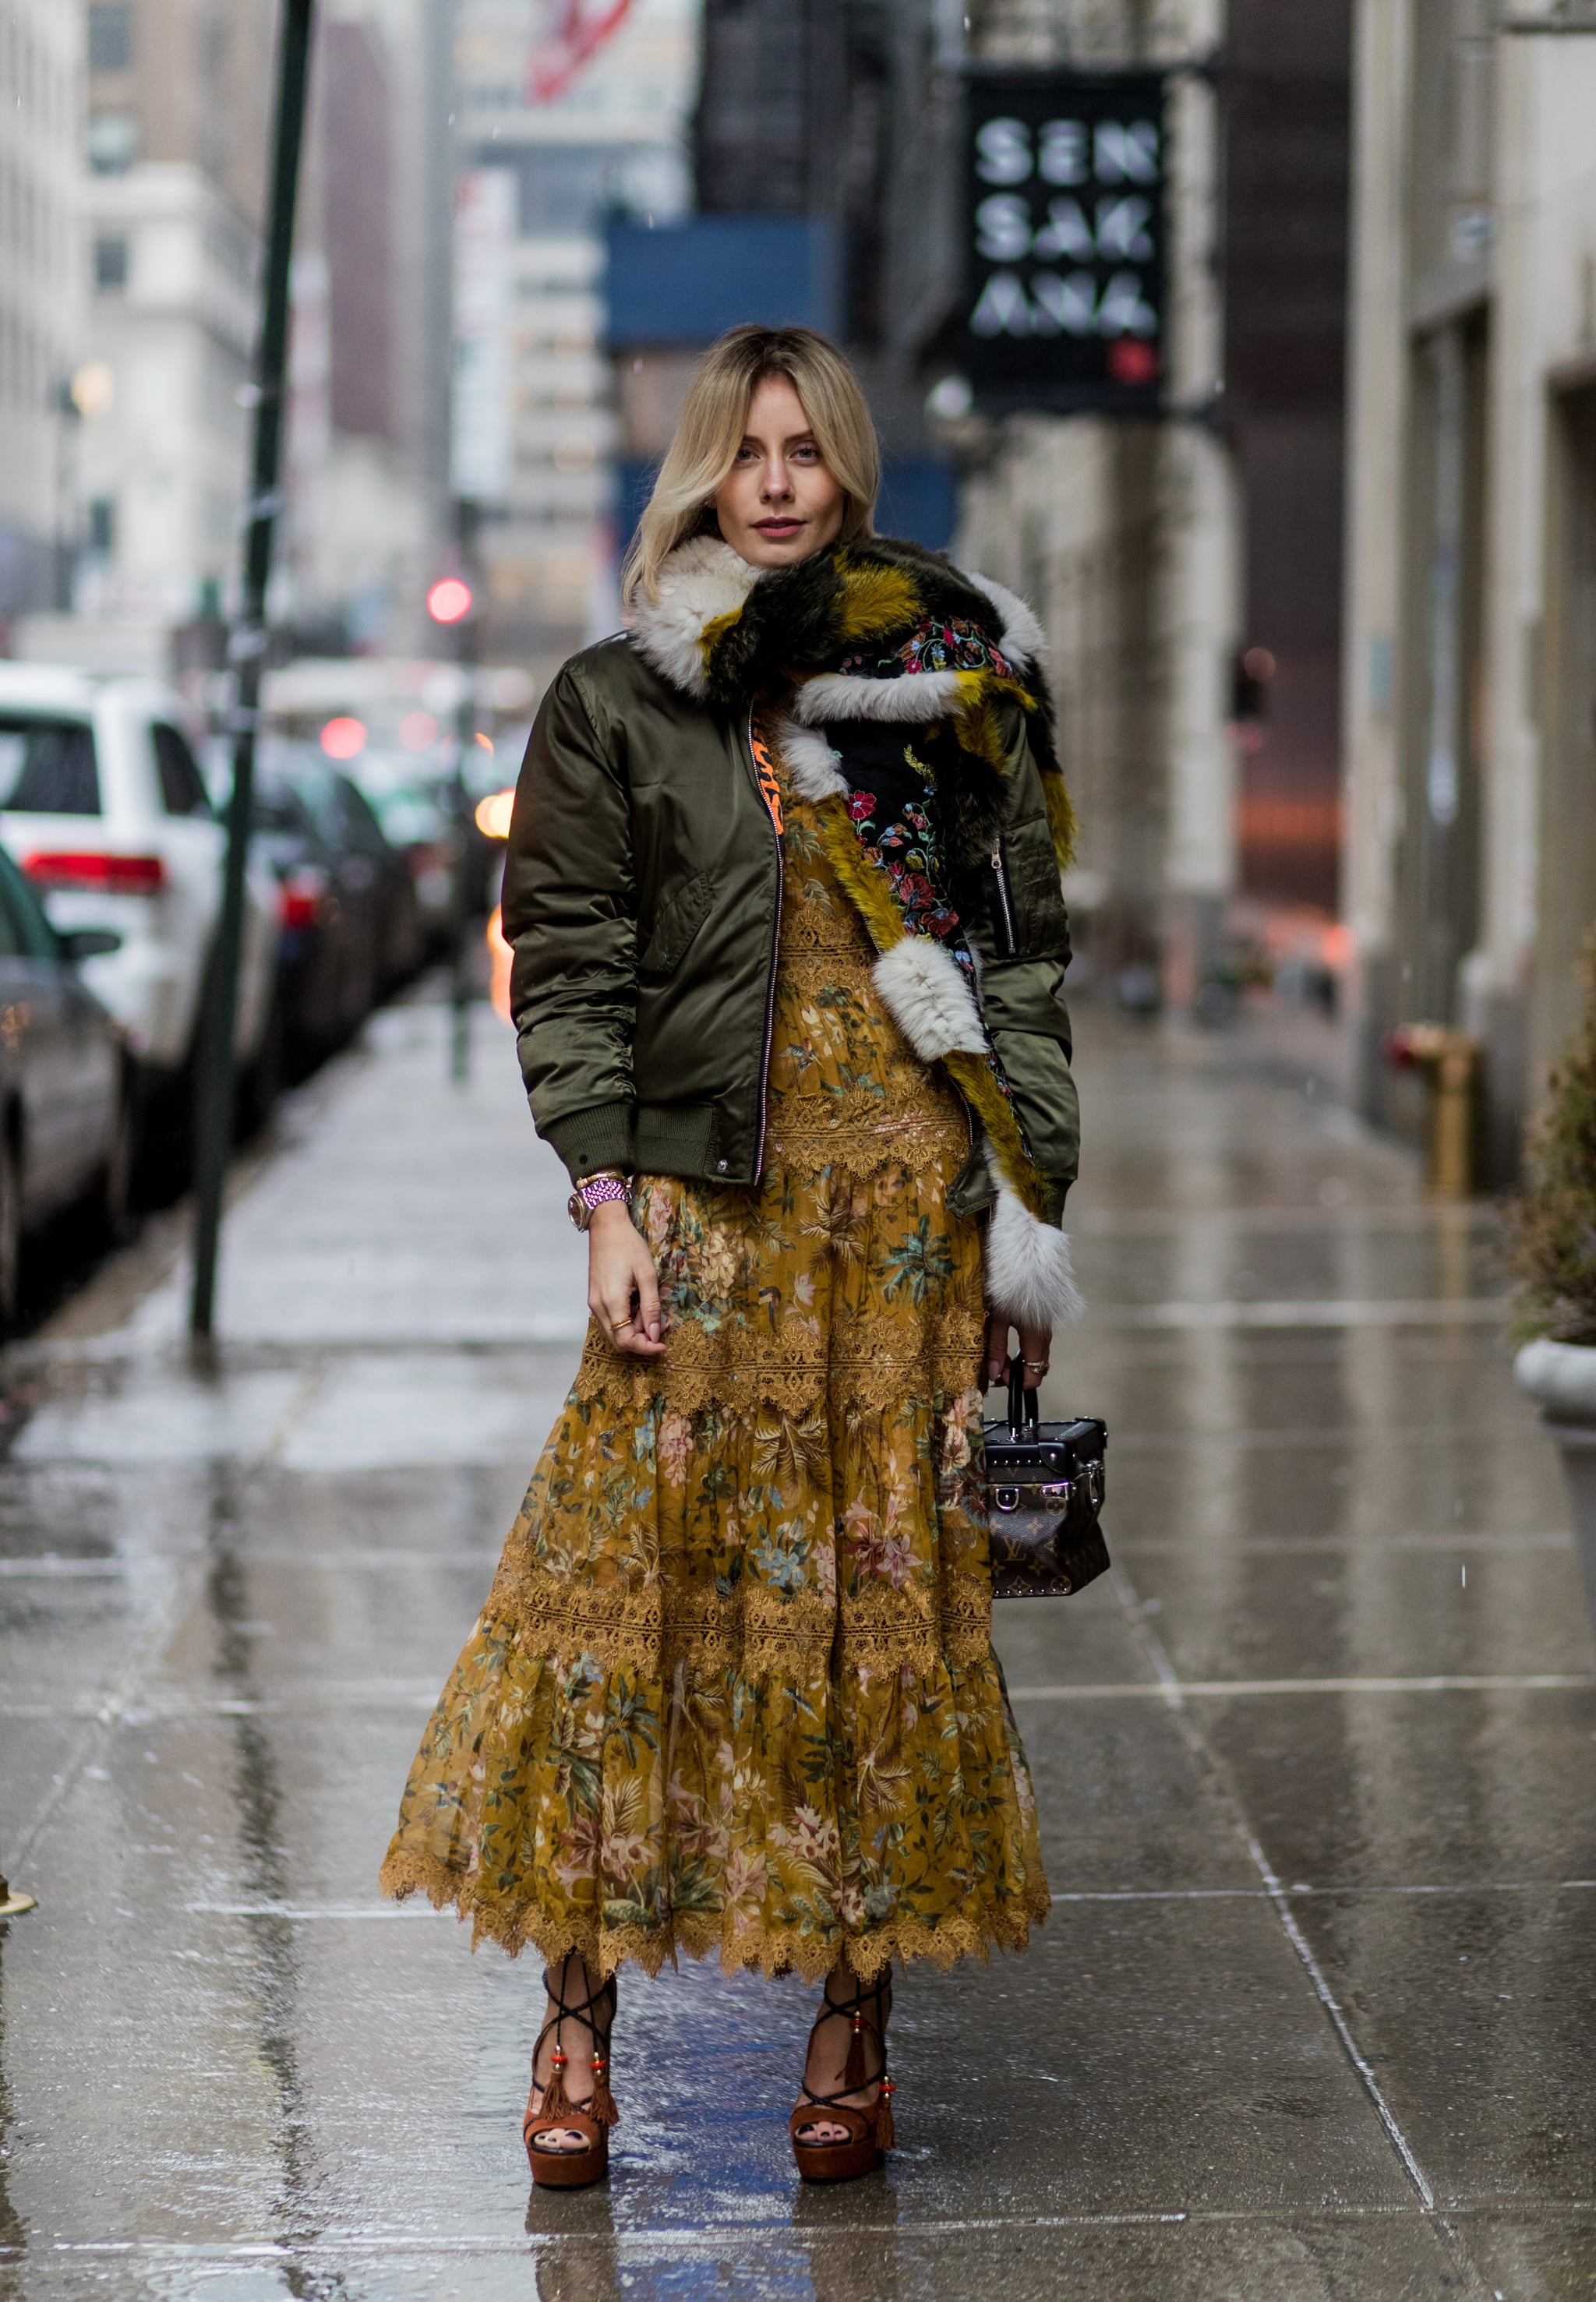 How To Style A Maxi Dress For Winter?